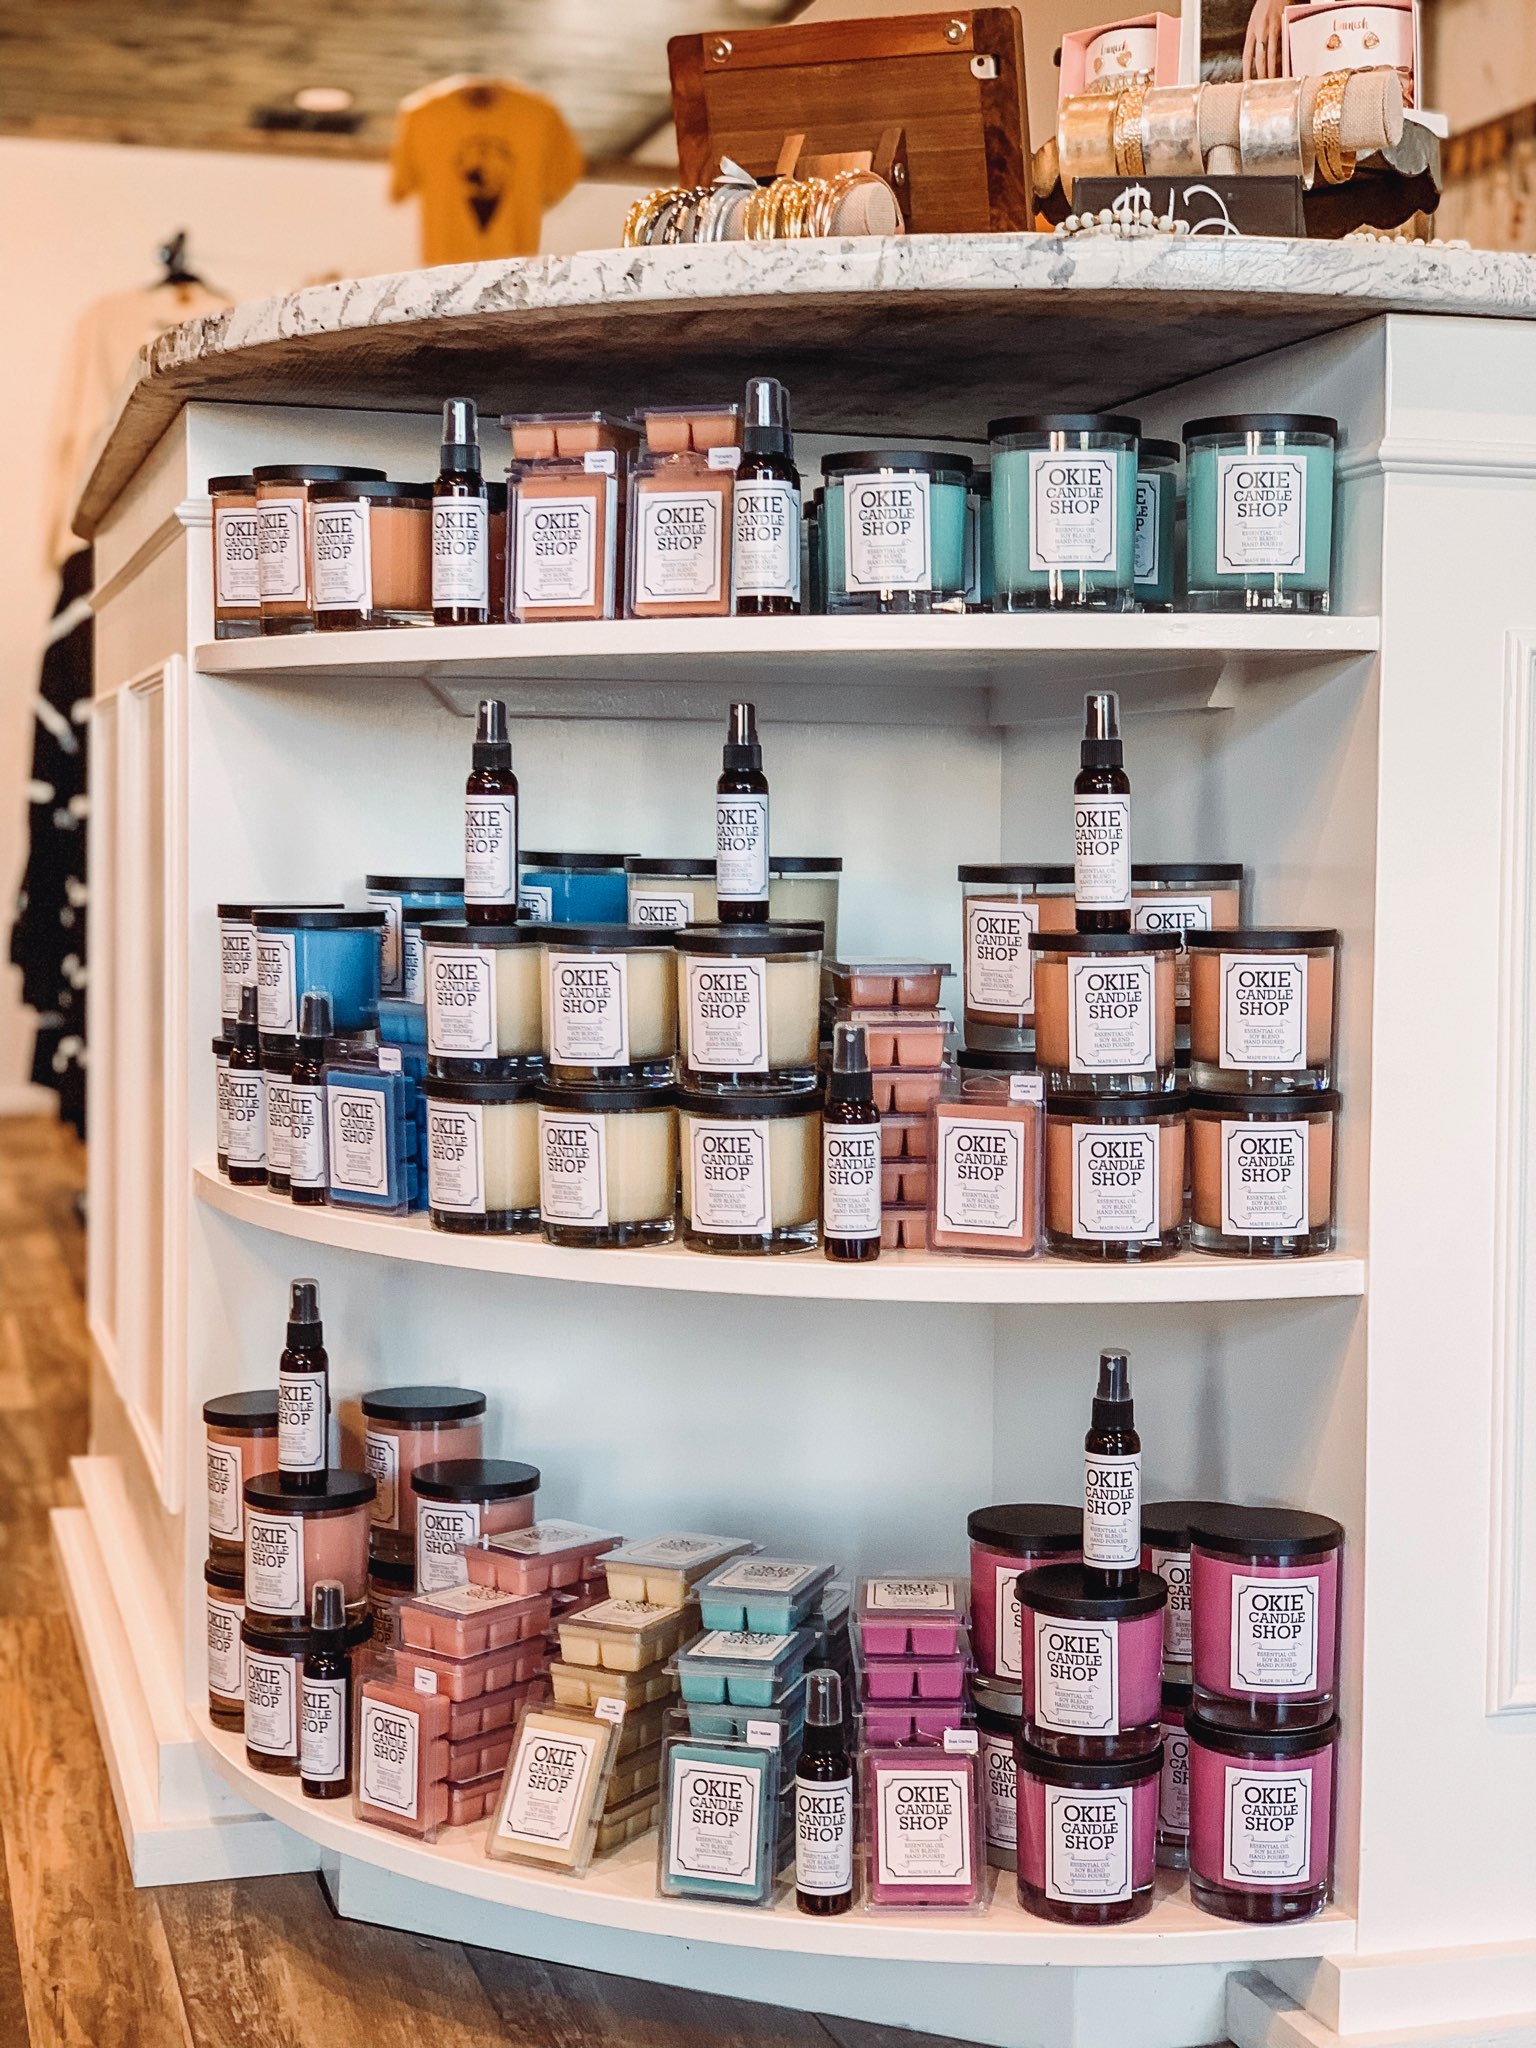 Okie Candle Shop | Hand-Poured Candles and Aroma Sprays | Display Gallery